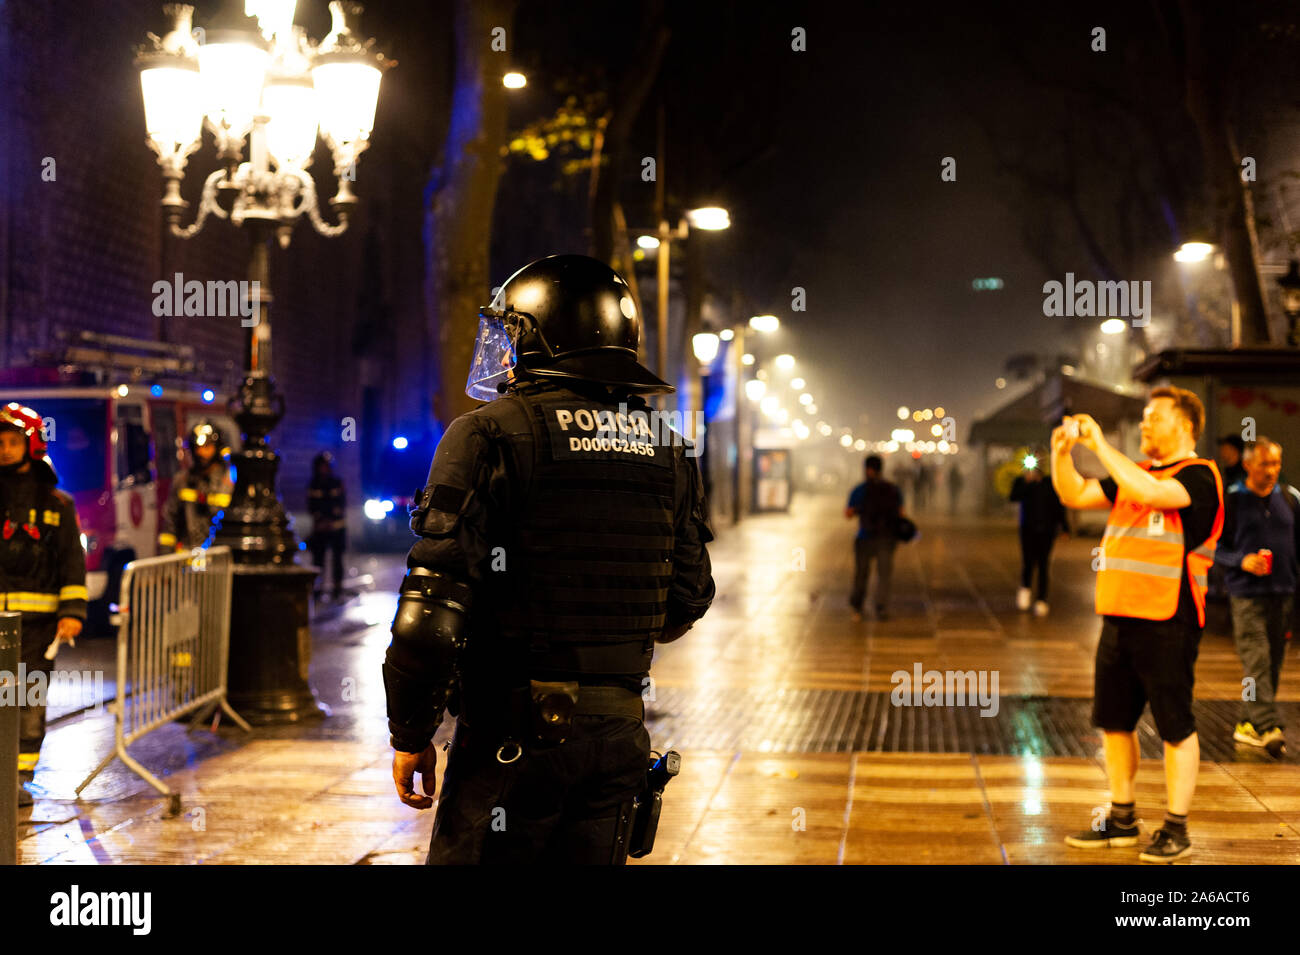 Barcelona, Spain - 18 october 2019: mossos d'esquadra in the ramblas street catalan police with guns confront with protesters at night during clashes Stock Photo